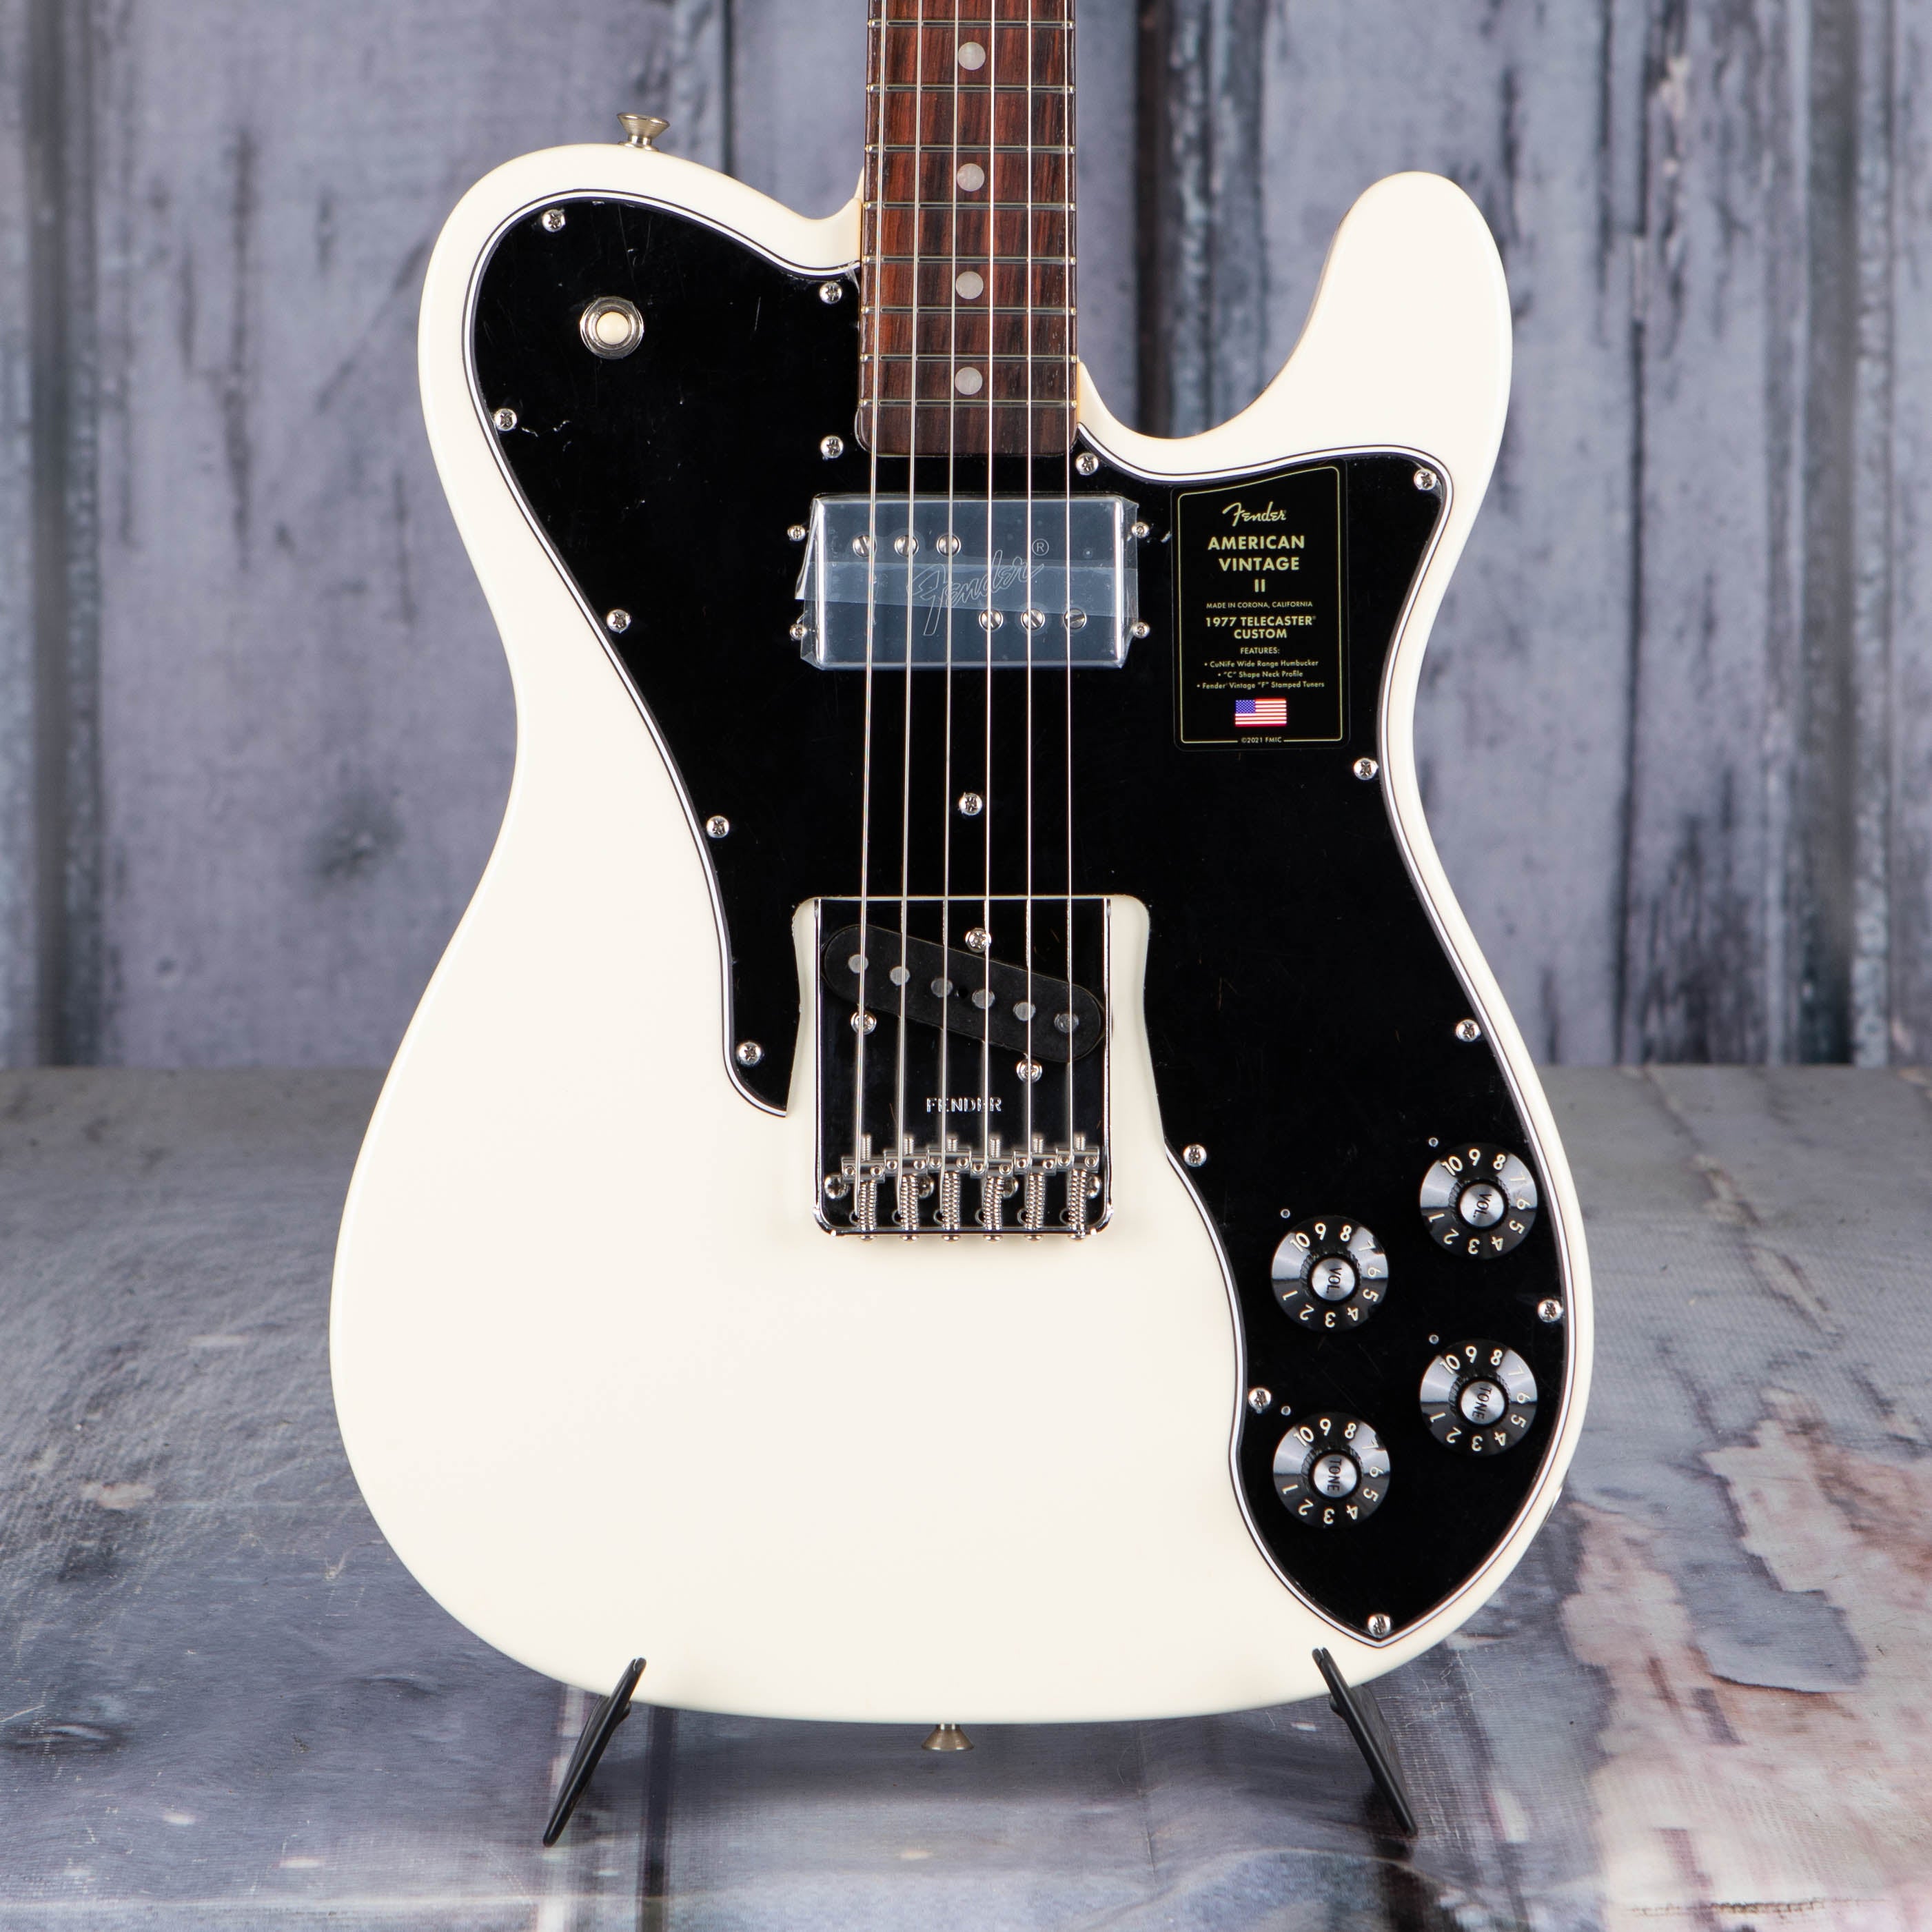 Fender Limited Edition American Vintage II 1977 Telecaster Custom Electric Guitar, Olympic White, front closeup